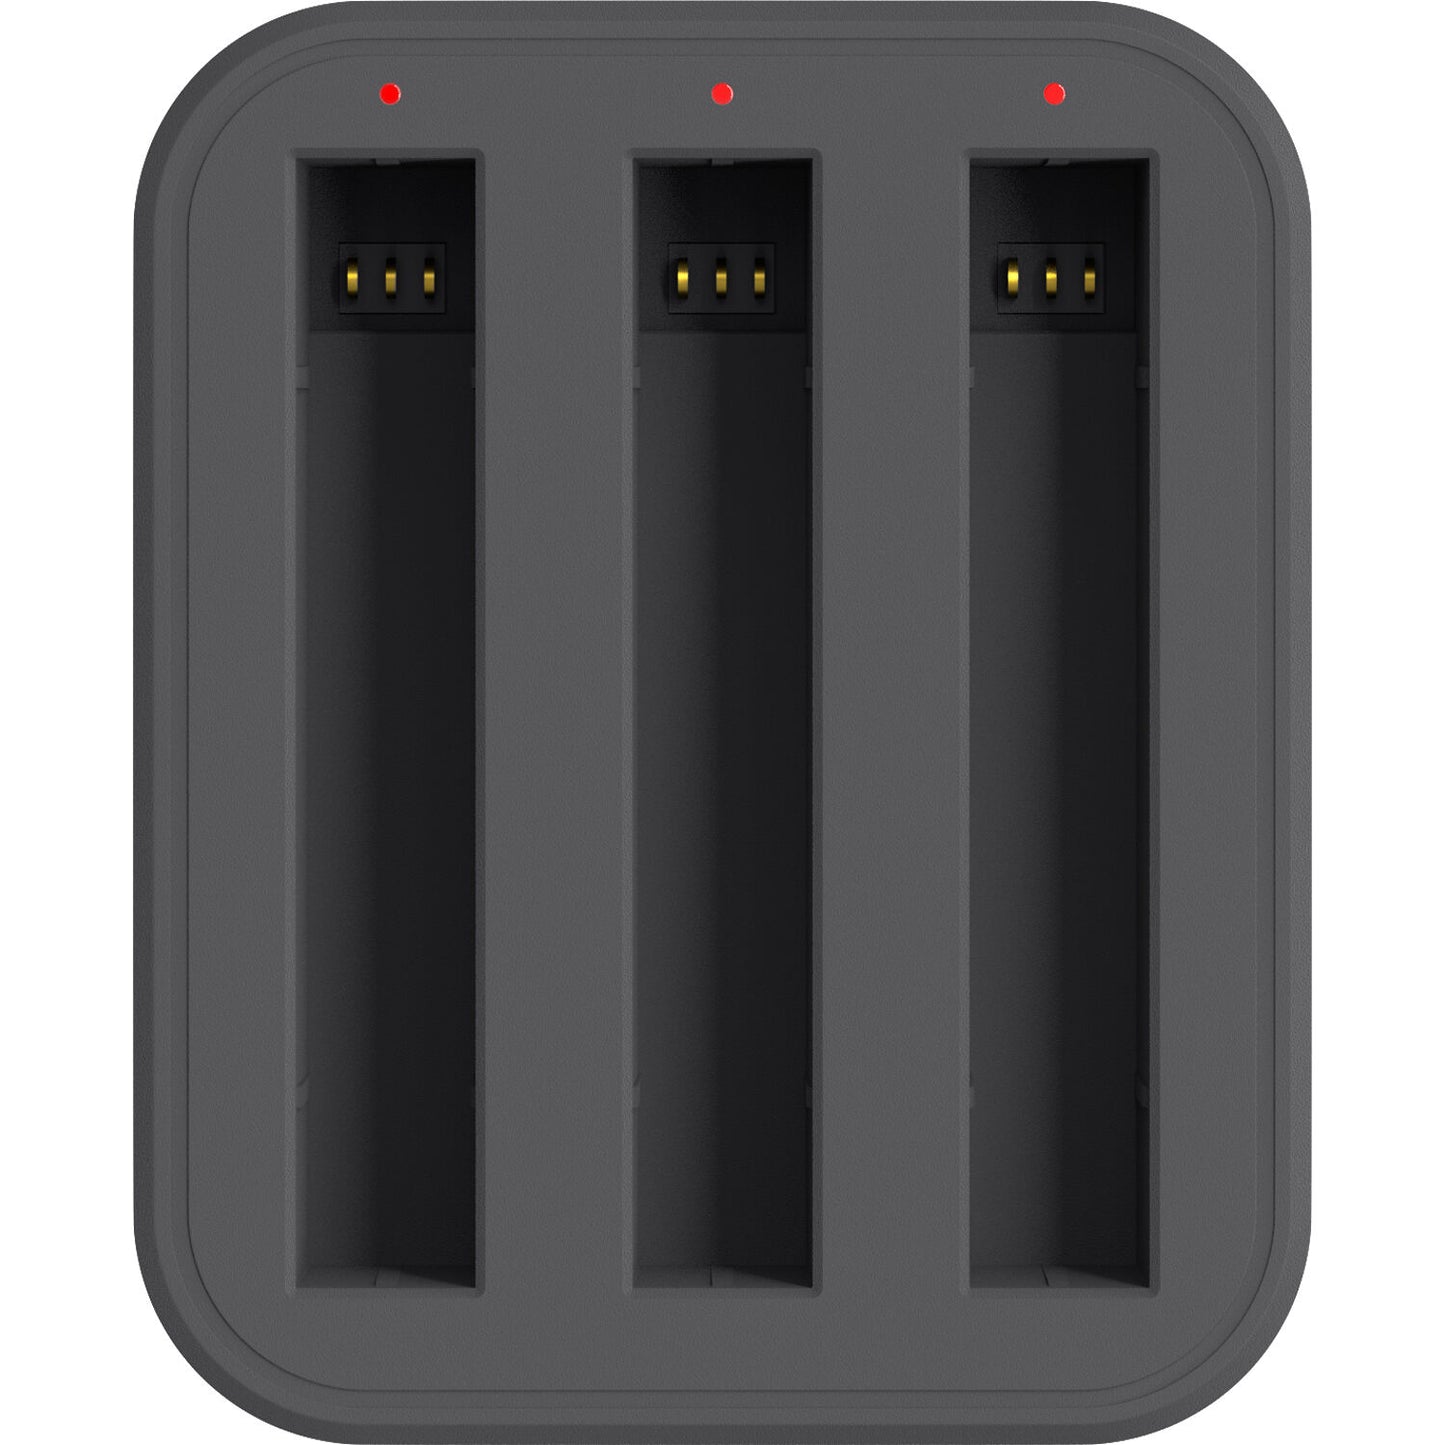 Insta360 3-Slot Fast Charging Hub for ONE X2 Battery Charger USB Type-C with LED Indicators